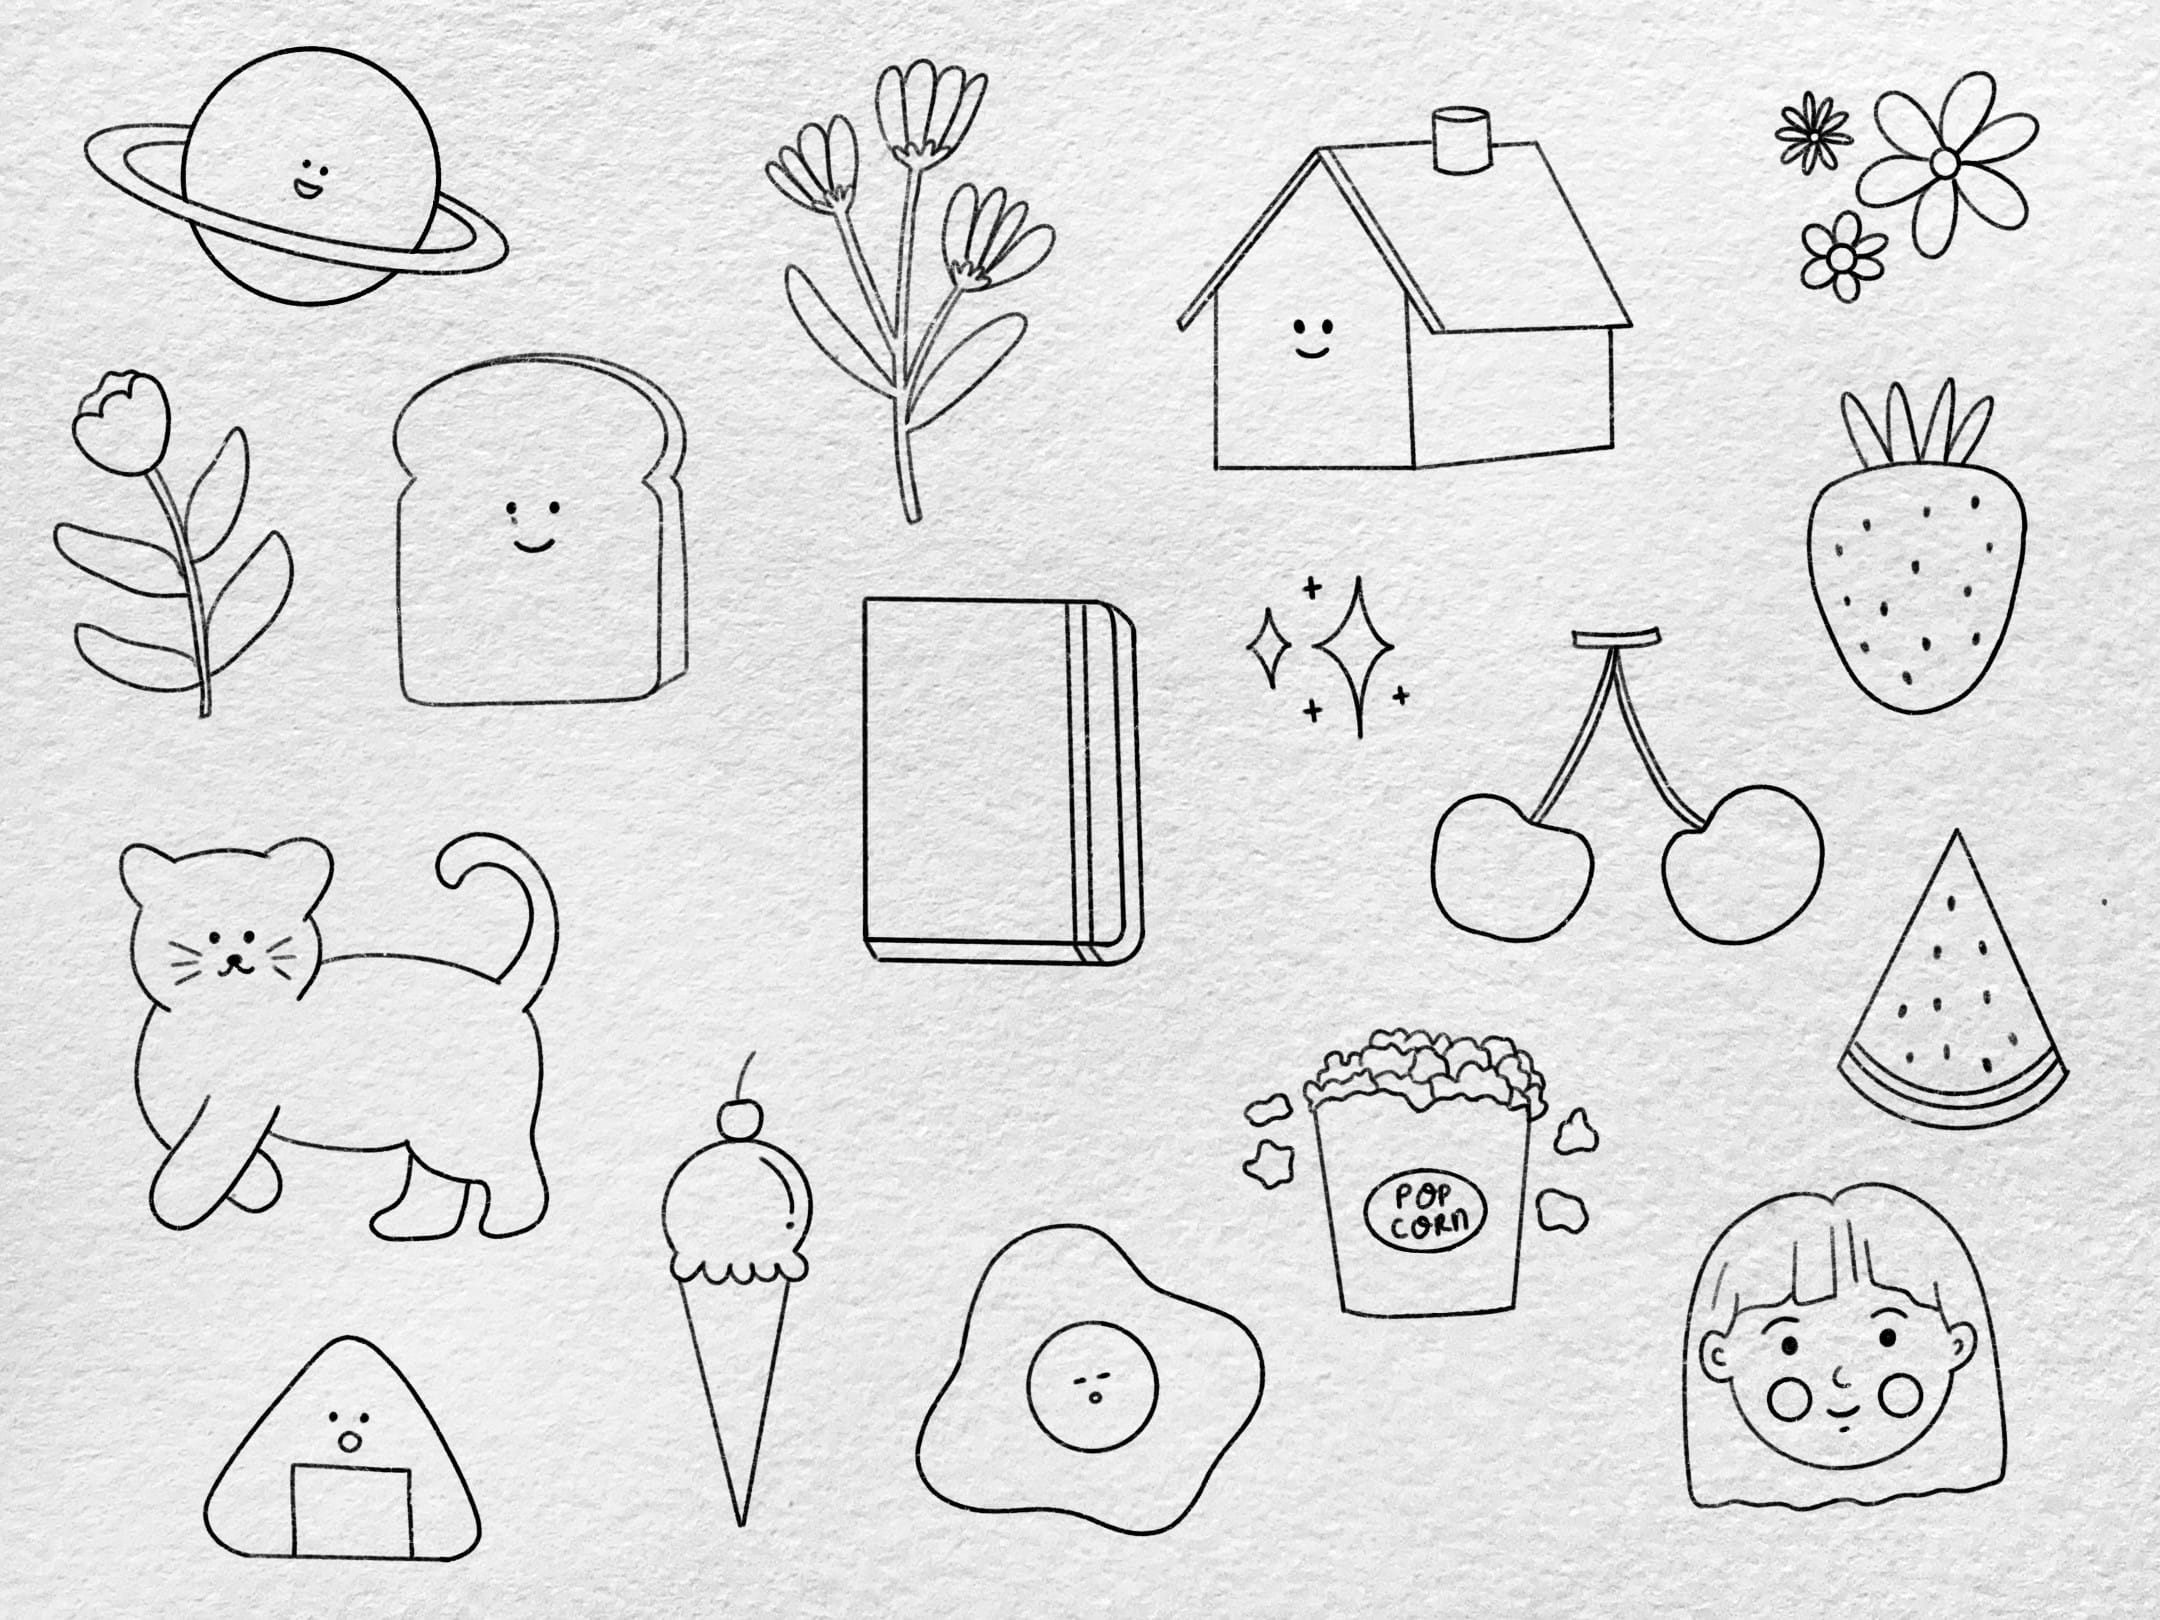 create cute doodle art illustrations vector doodles and stickers